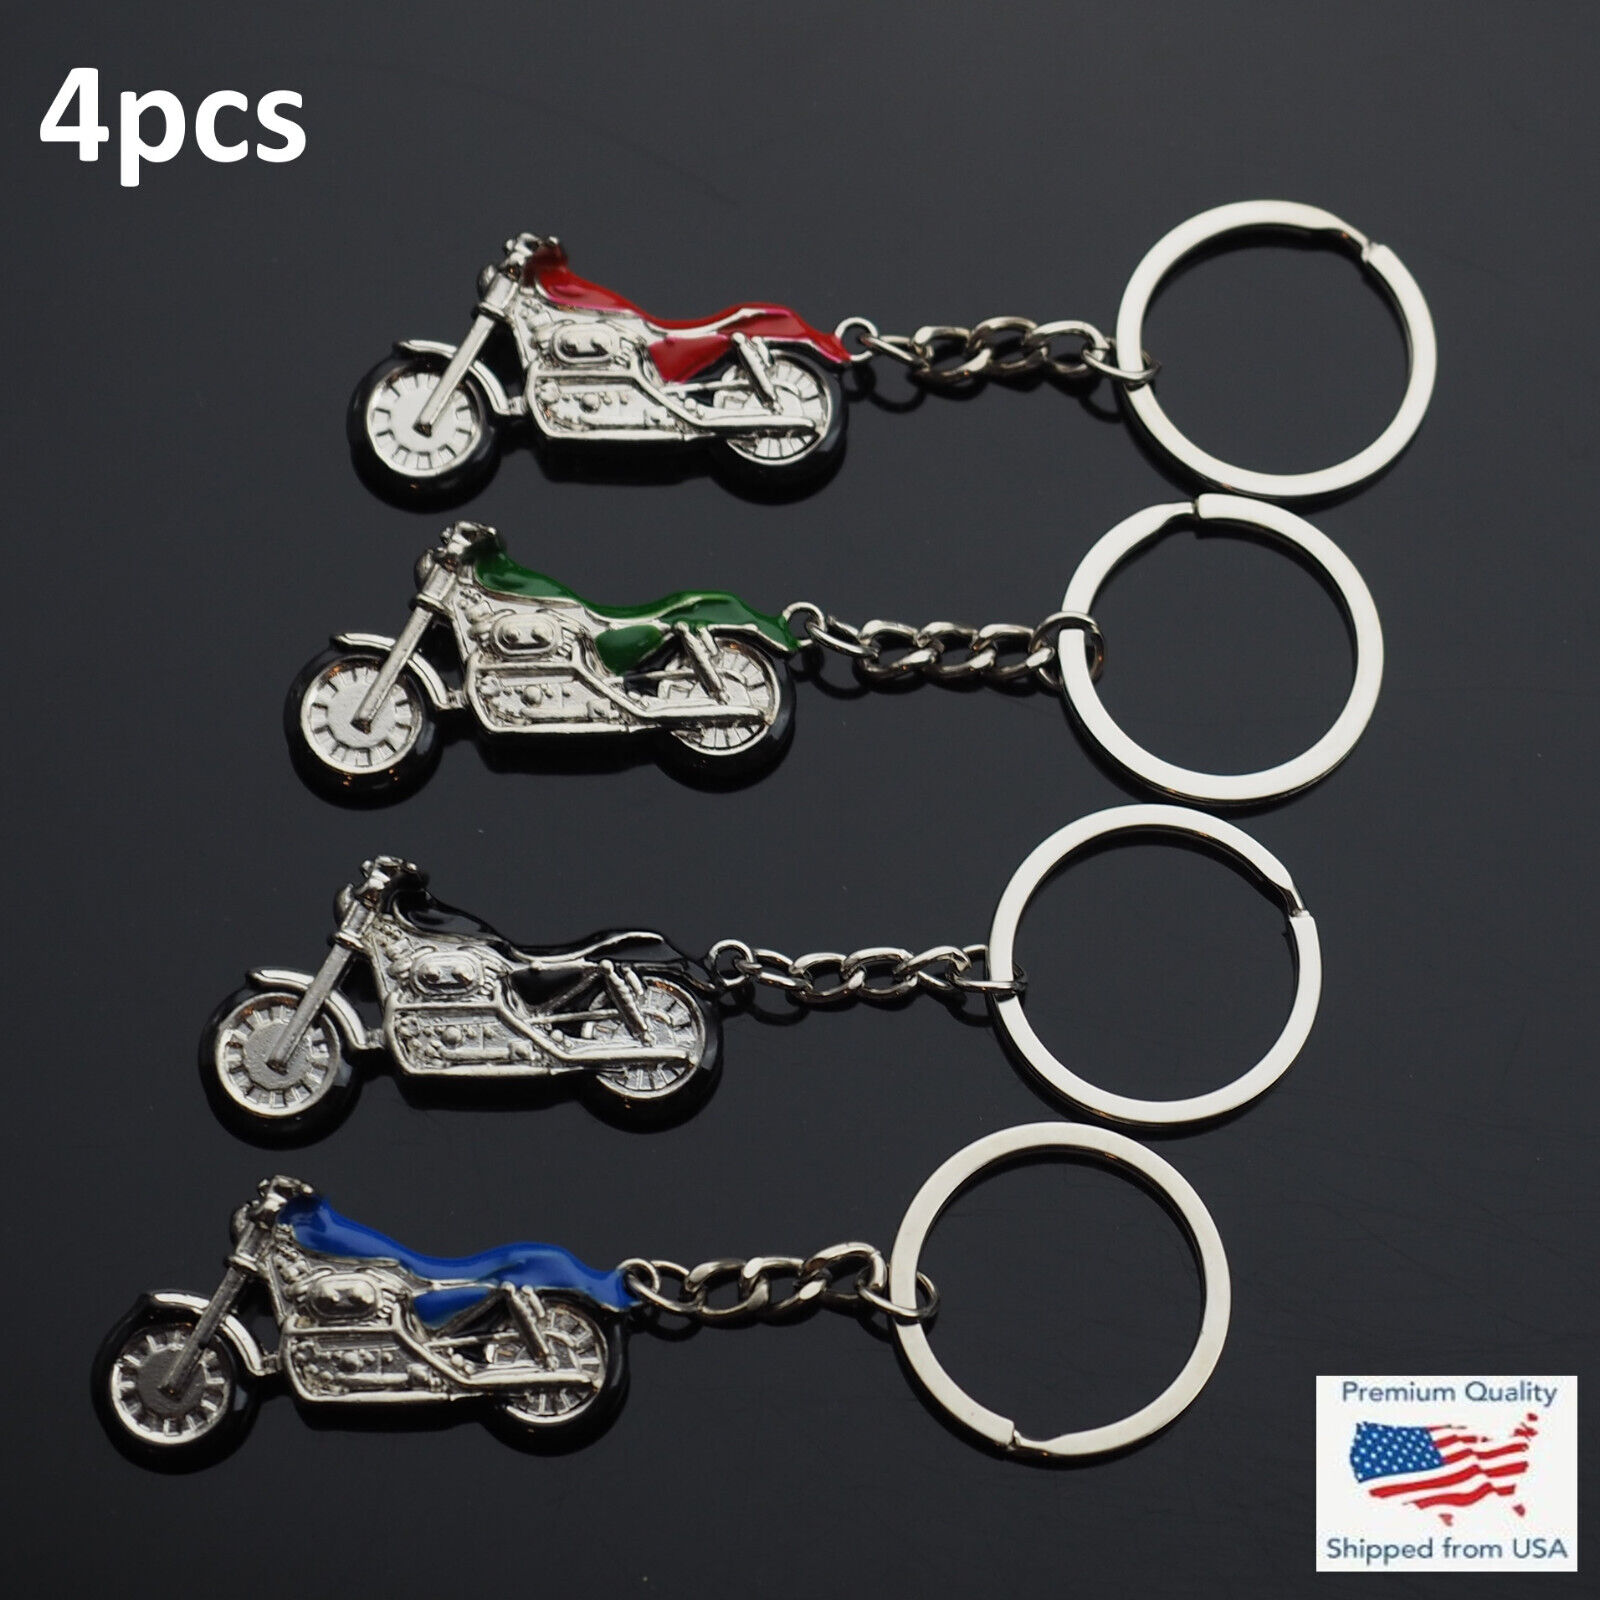 4pcs - 3D Simulation Model Motorcycle Keychain Key Chain Ring Keyring - 4 Colors